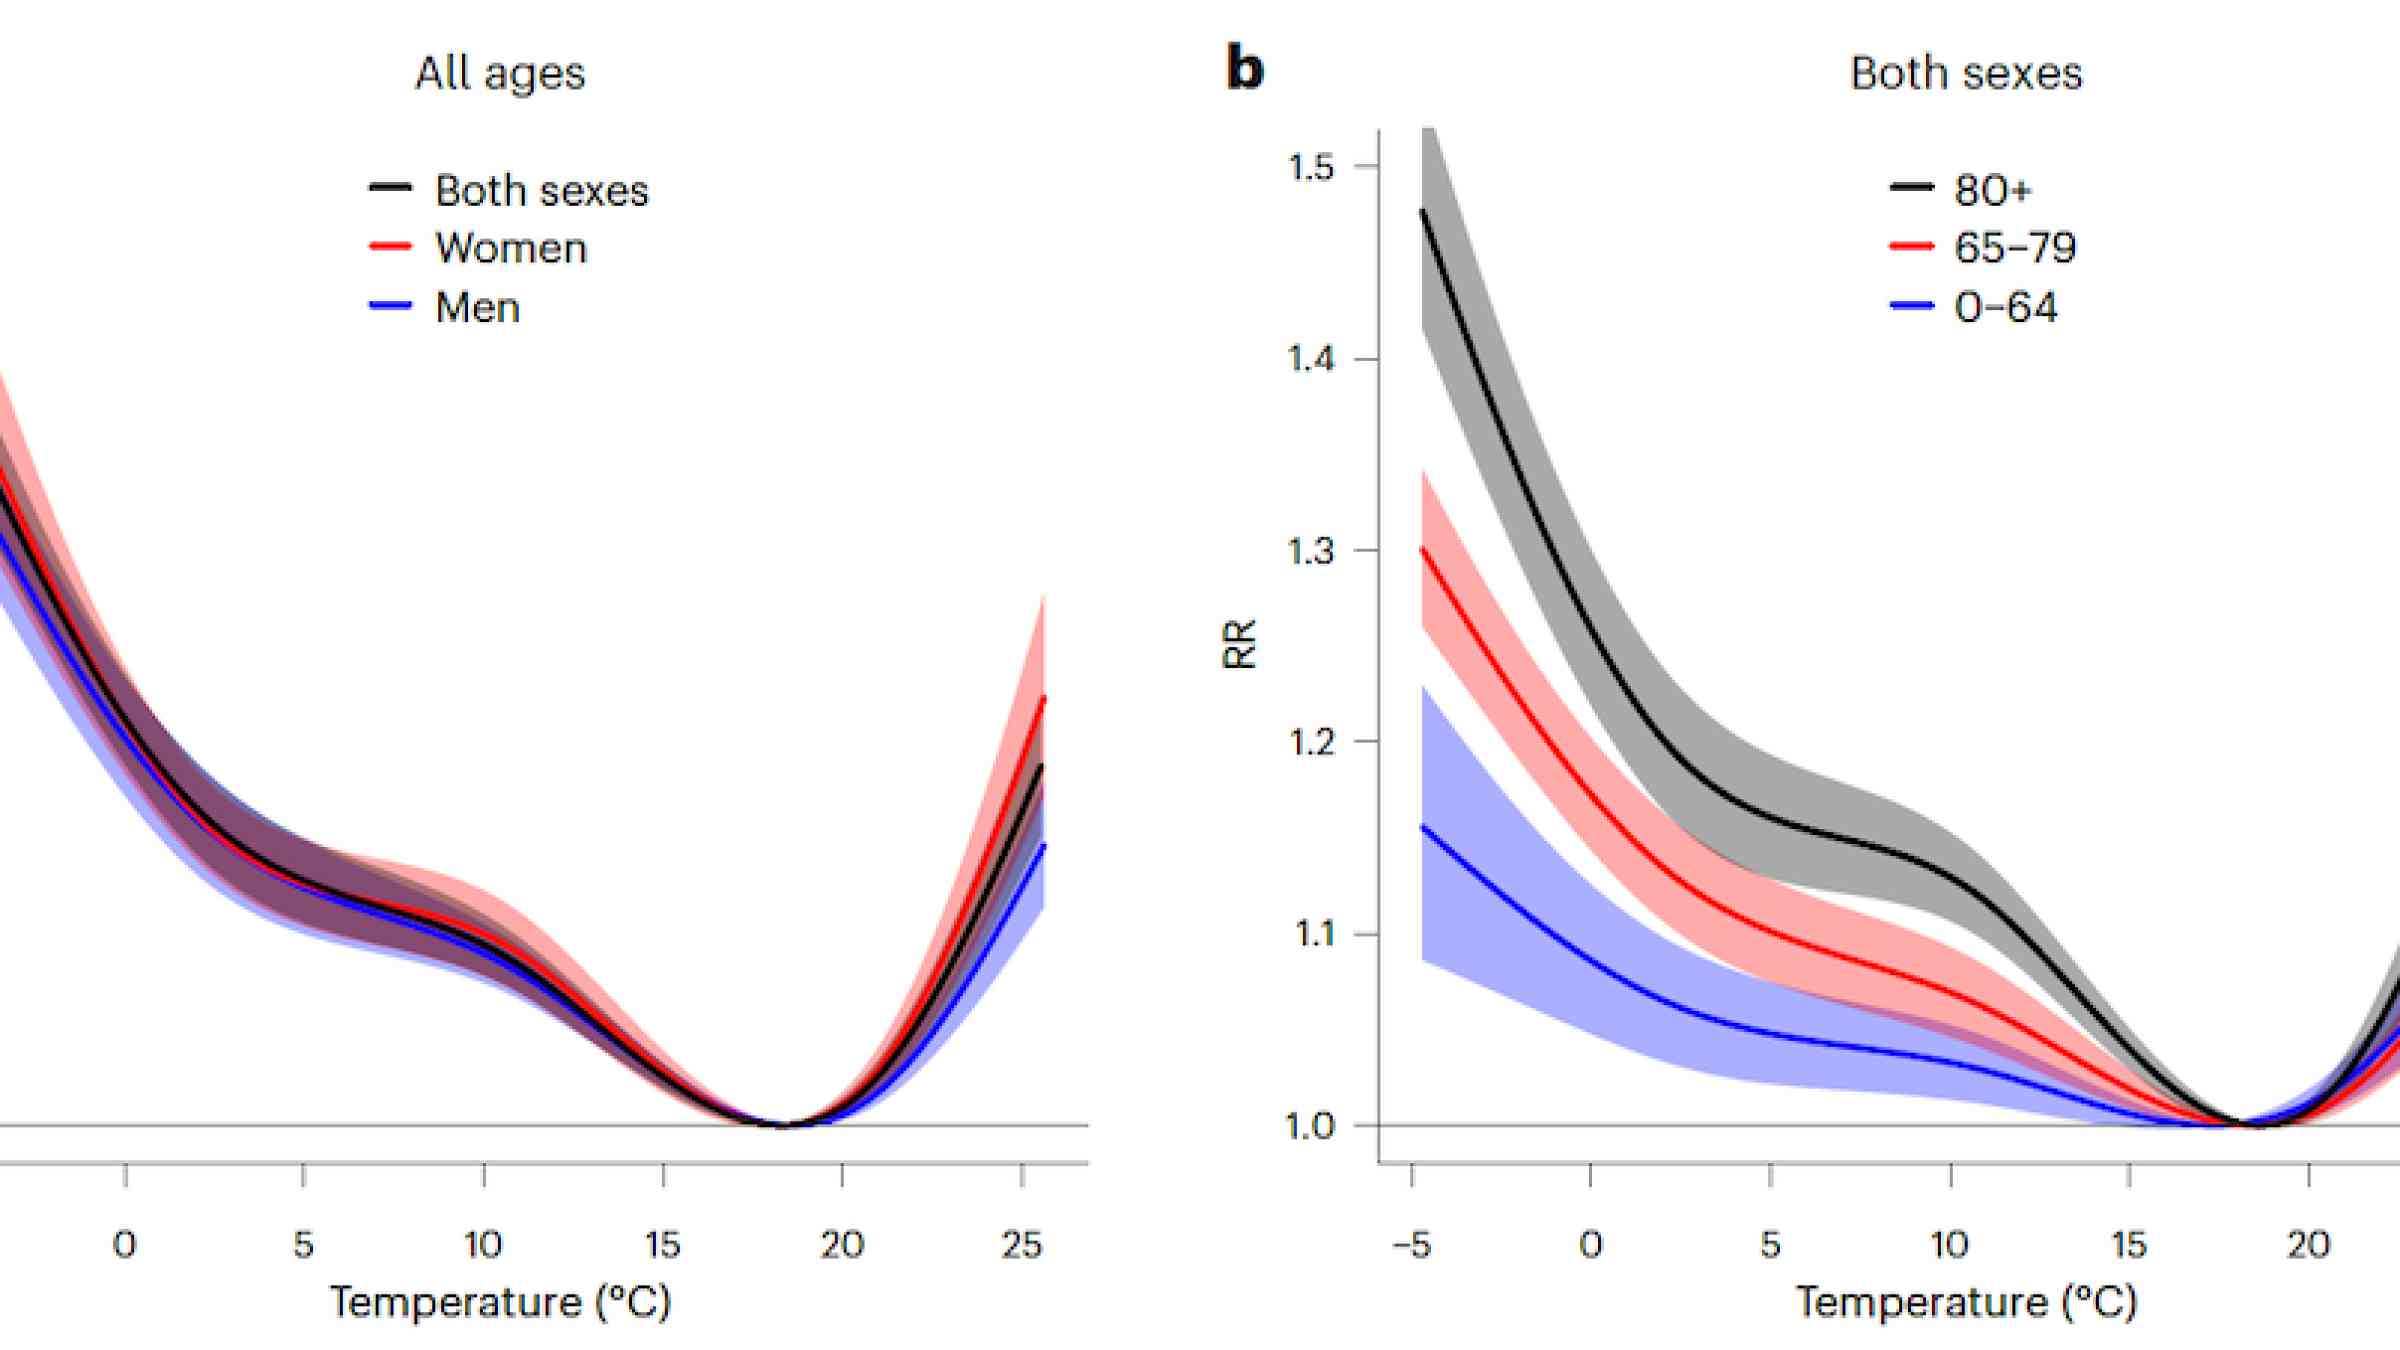 Graph showing Cumulative relative risk of death in Europe for the overall population (black), women (red) and men (blue) on the left, and people aged 0-64 (blue), 65-79 (red) and 80+ (black) on the right. Shading shows the 95% confidence interval. 